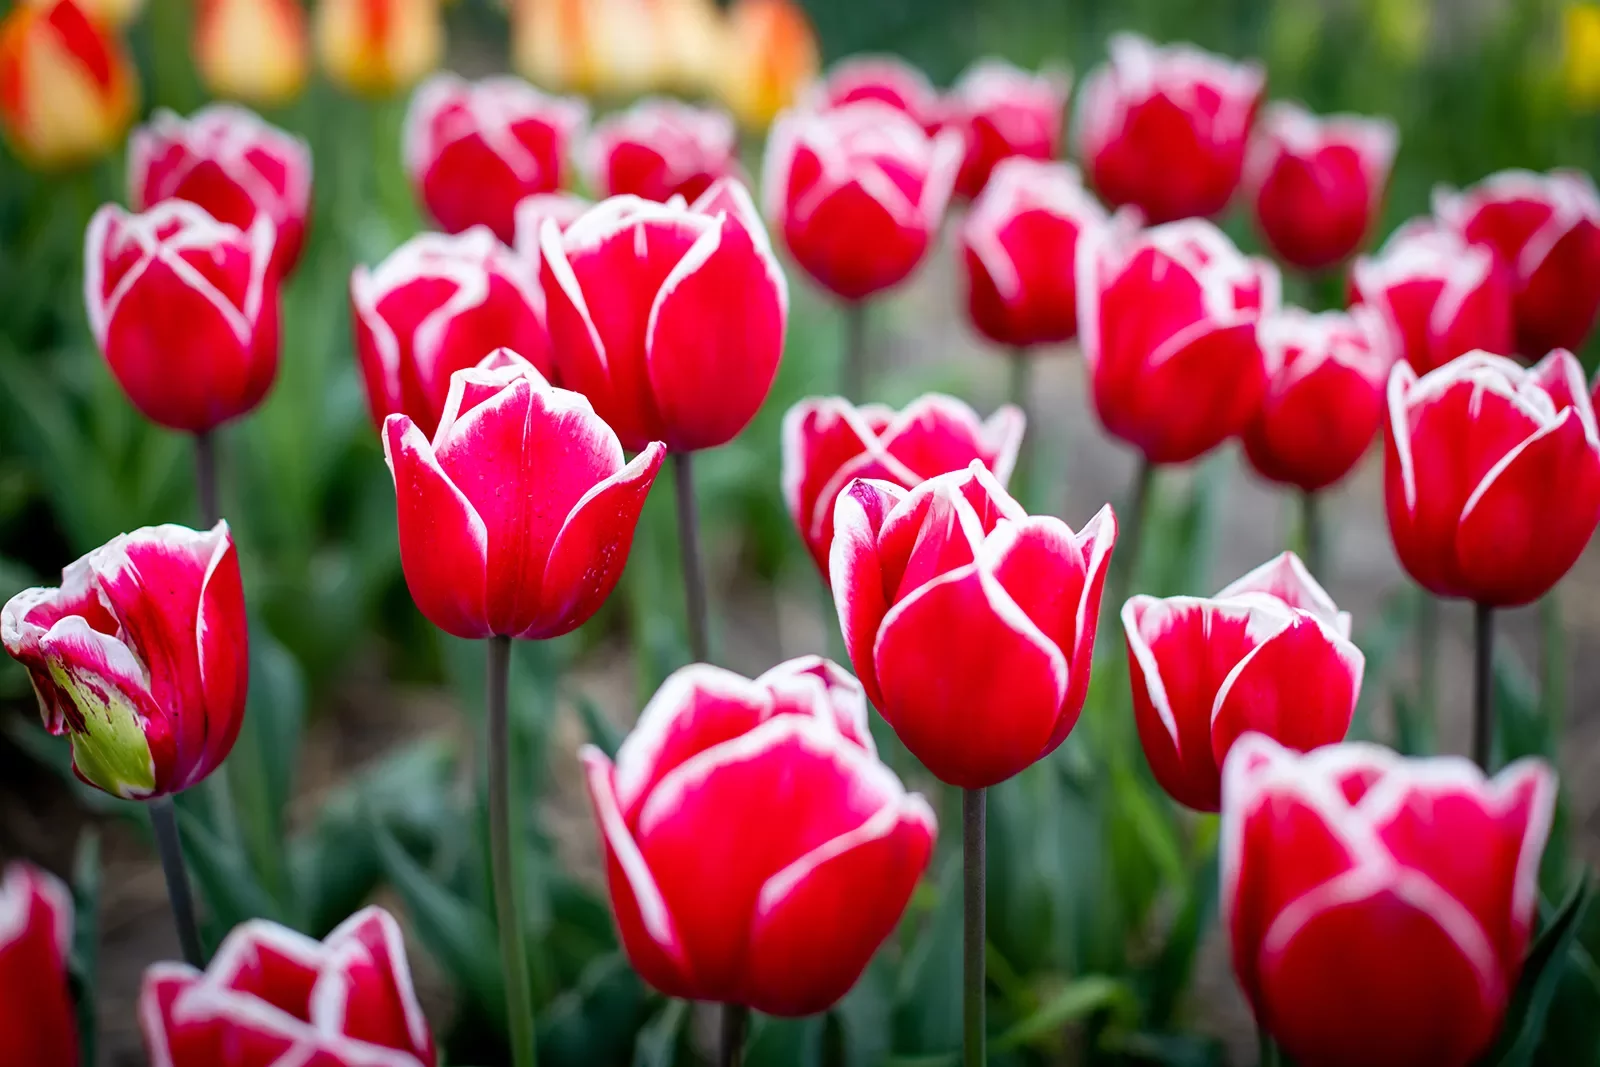 Close-up of red tulips with white tips.